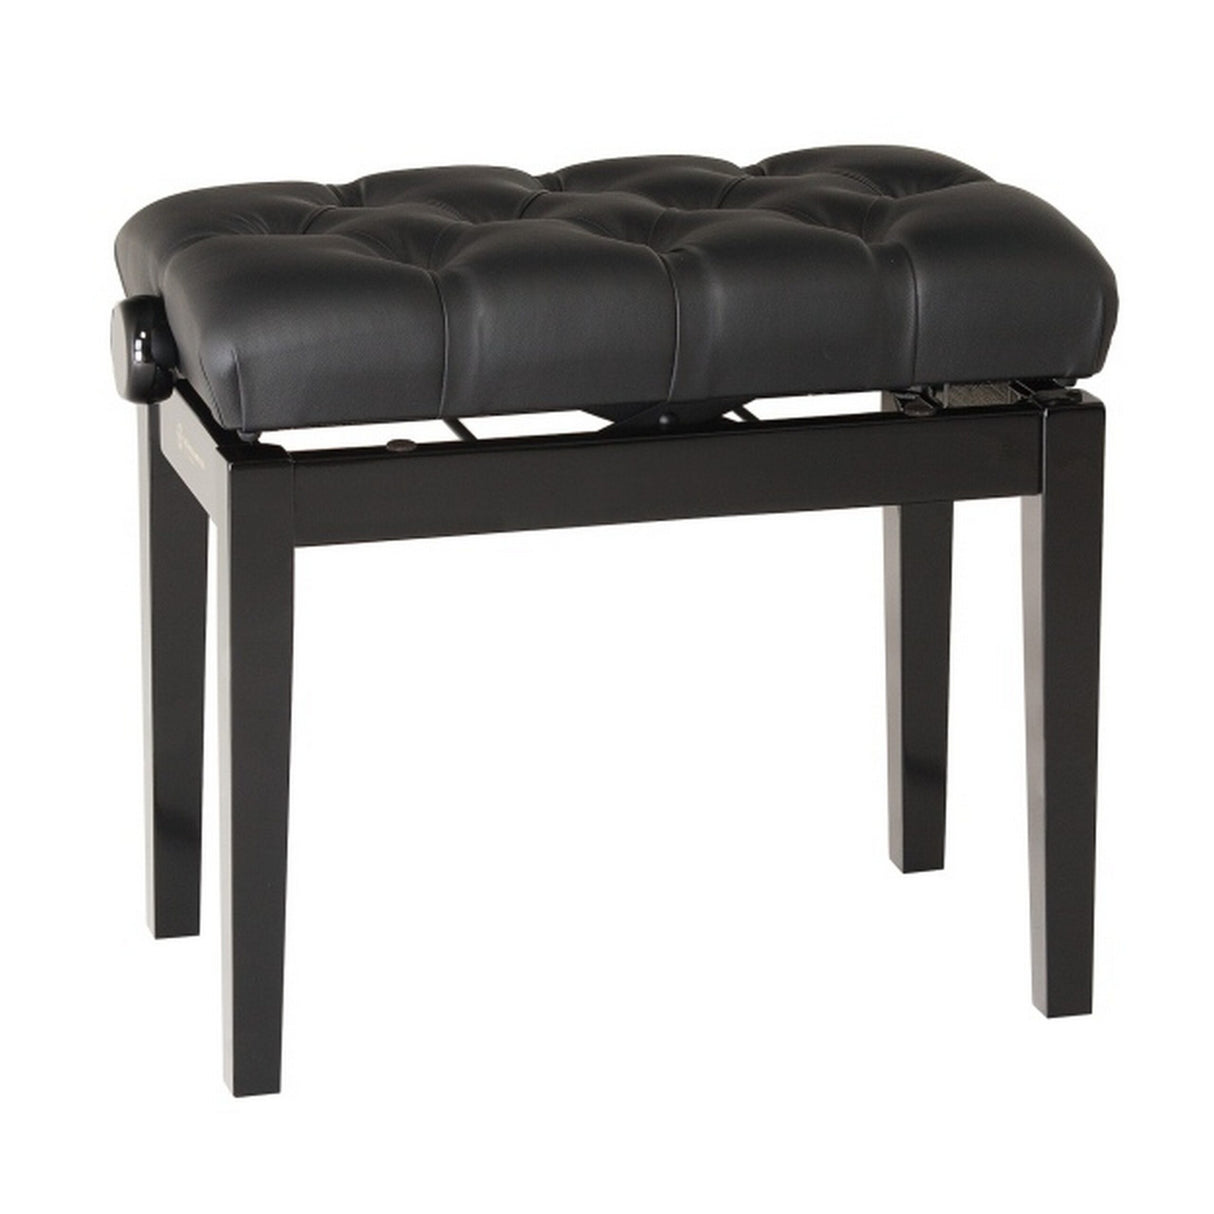 K&M 13981 Piano Bench with Quilted Seat Cushion, Black Glossy Finish Bench, Black Leather Seat